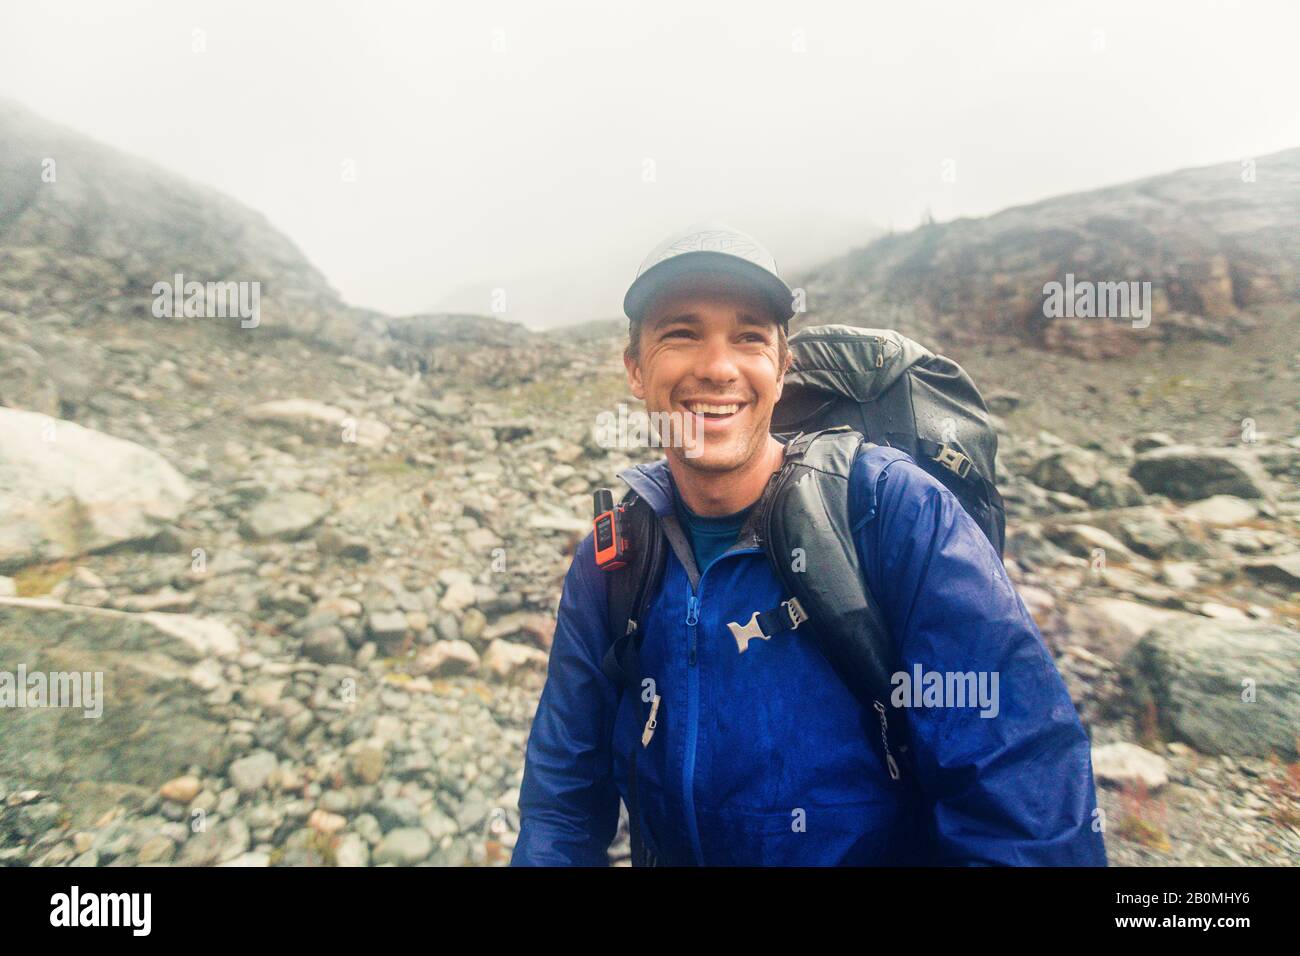 Backpacker smiling despite bad weather, rain and wind. Stock Photo